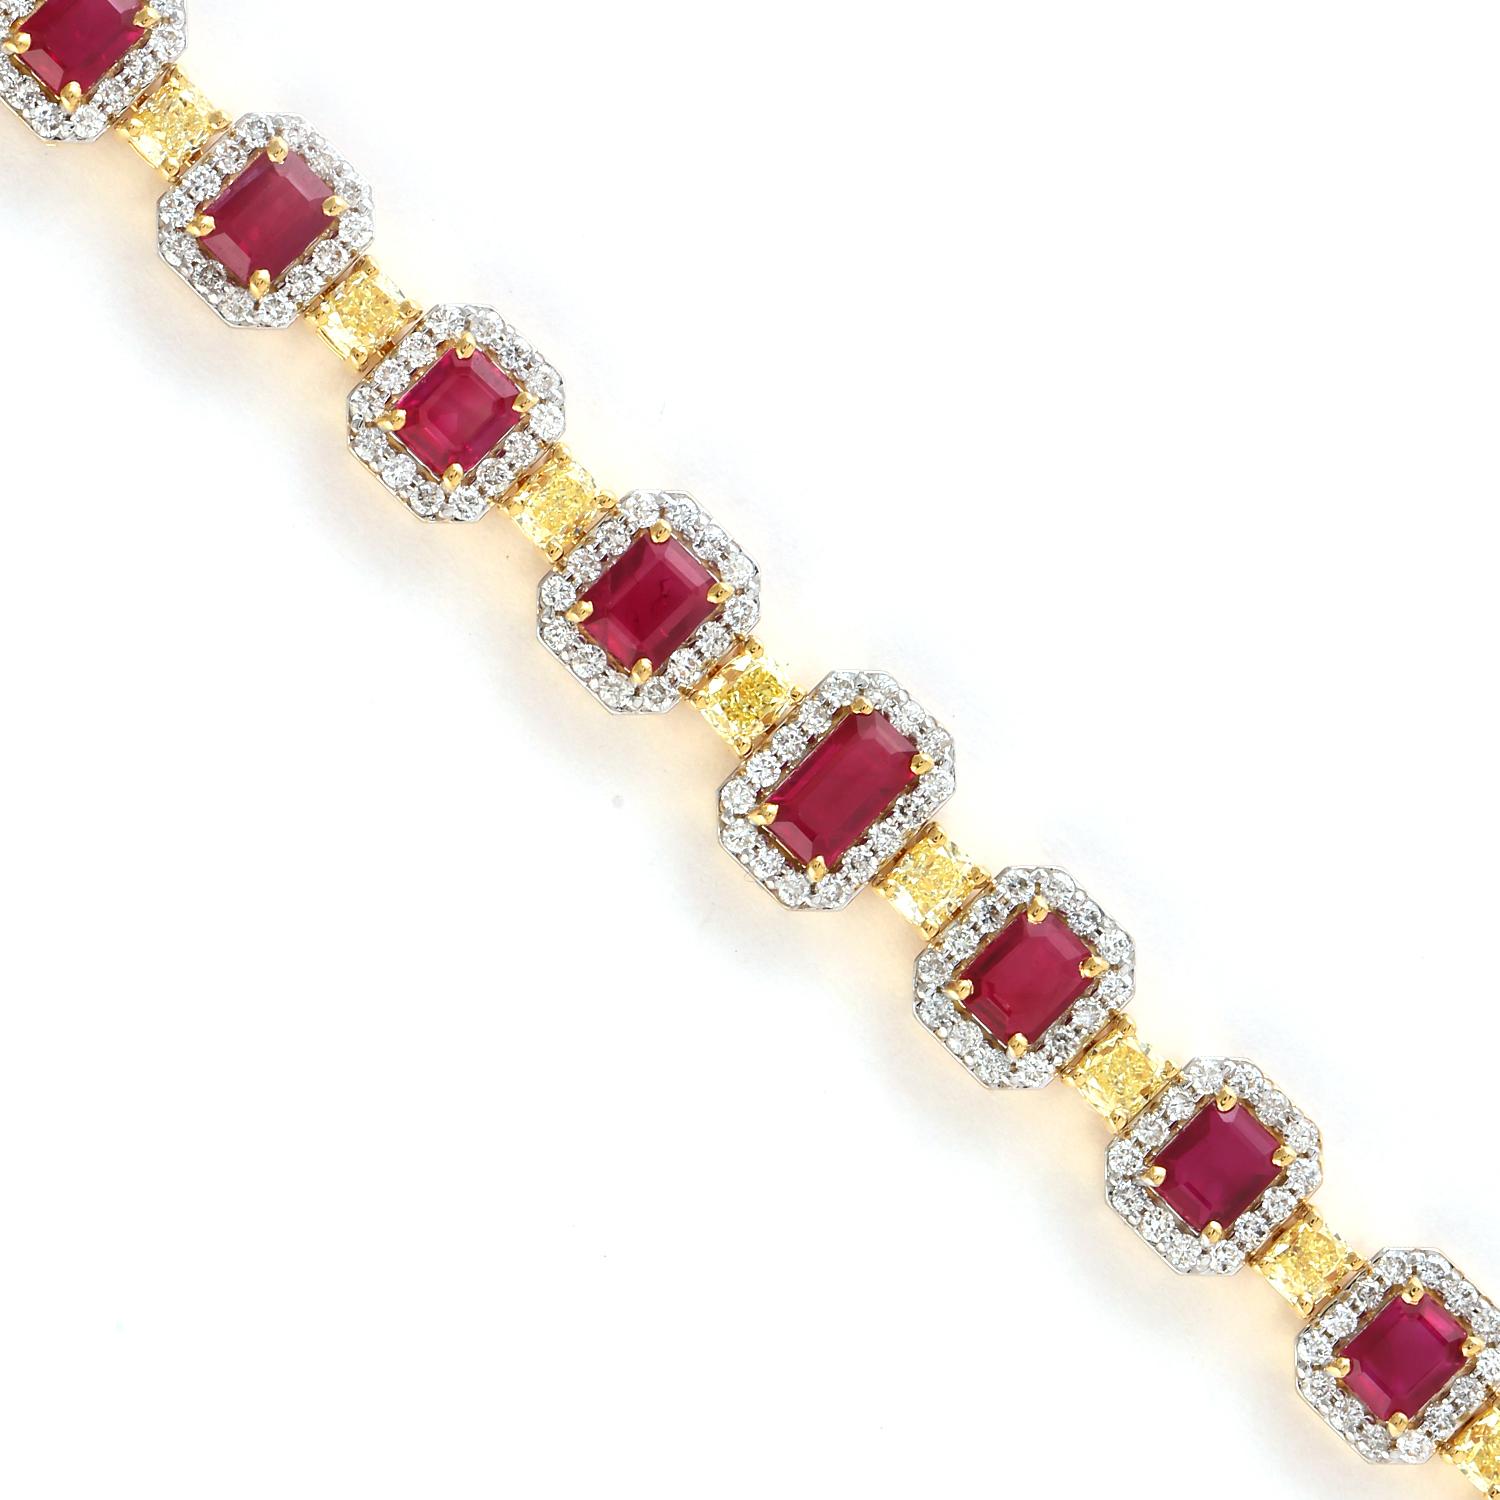 This Classic Emerald cut Ruby tennis bracelet with white and Yellow Diamonds in 18K Yellow Gold is a forever gorgeous piece.

18KT: 18.64gms
Diamond: 5.64ct
Ruby: 6.69cts